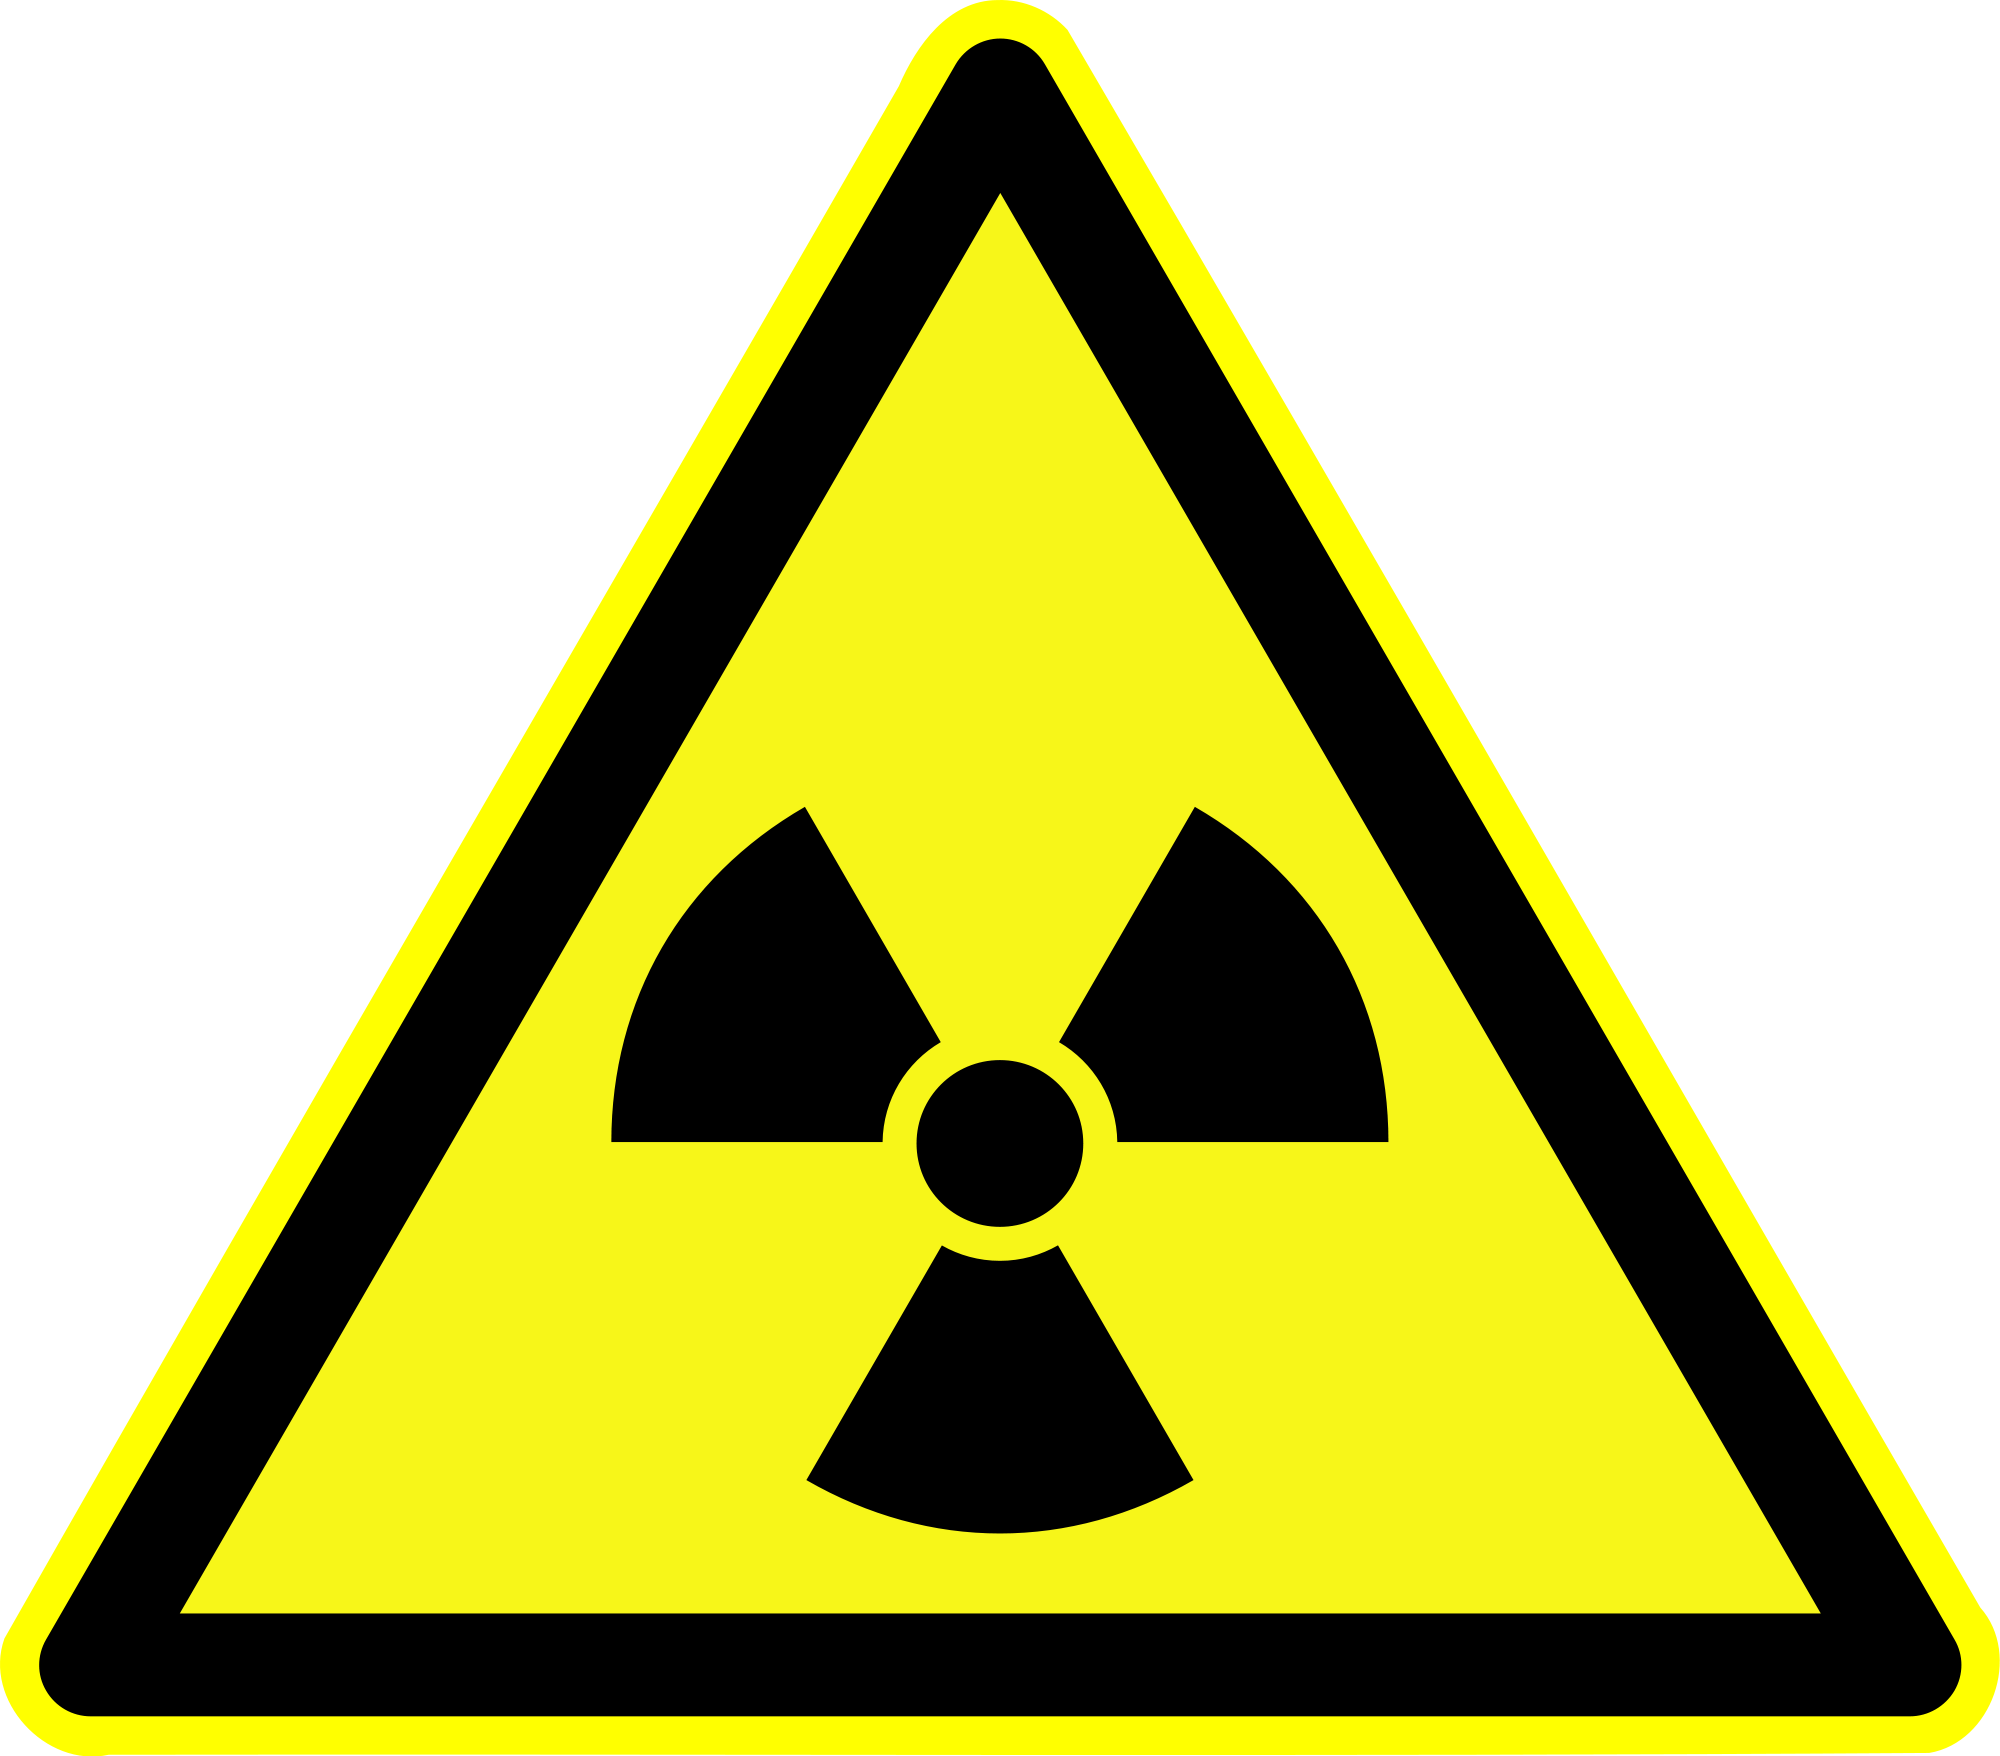 Physics Buzz: What's more radioactive than a nuclear power plant?